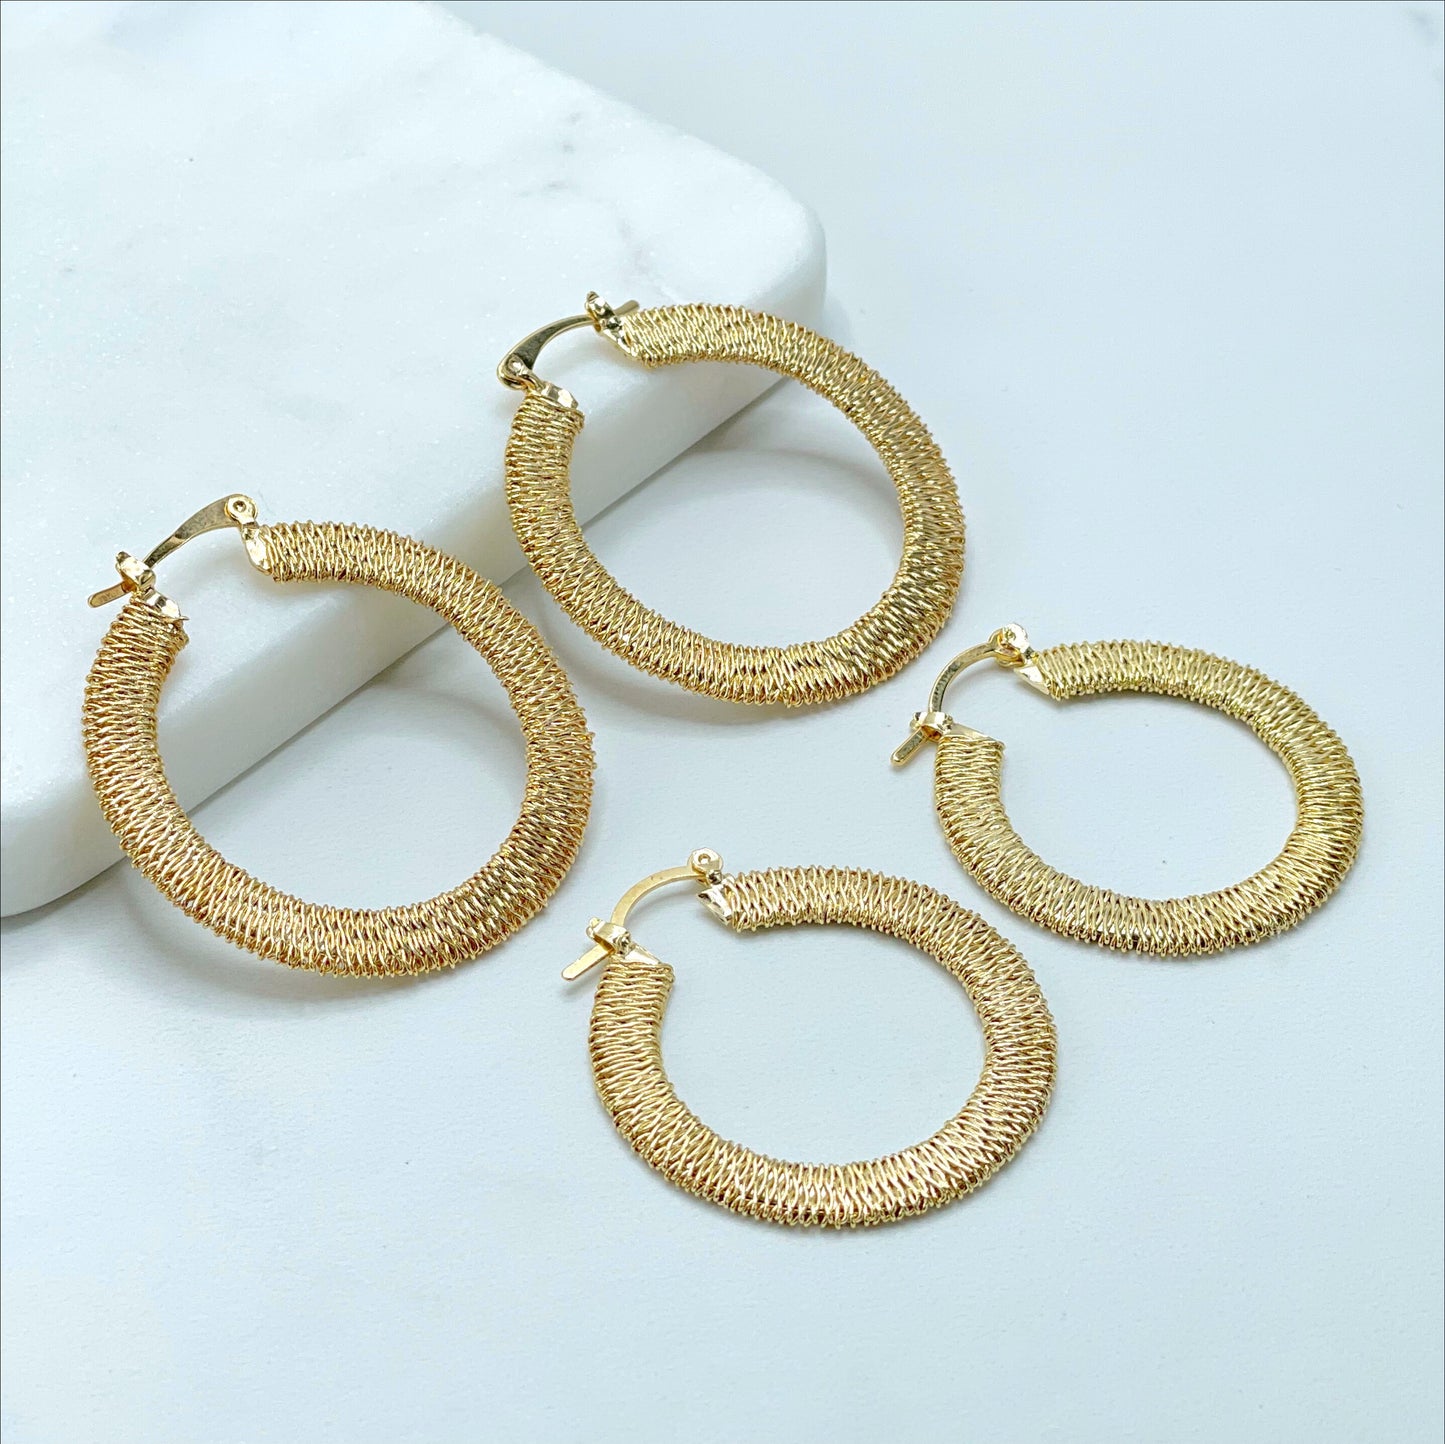 18k Gold Filled 33mm or 39mm Textured Hoops 5mm Thickness, Handmade Earrings Wholesale Jewelry Making Supplies